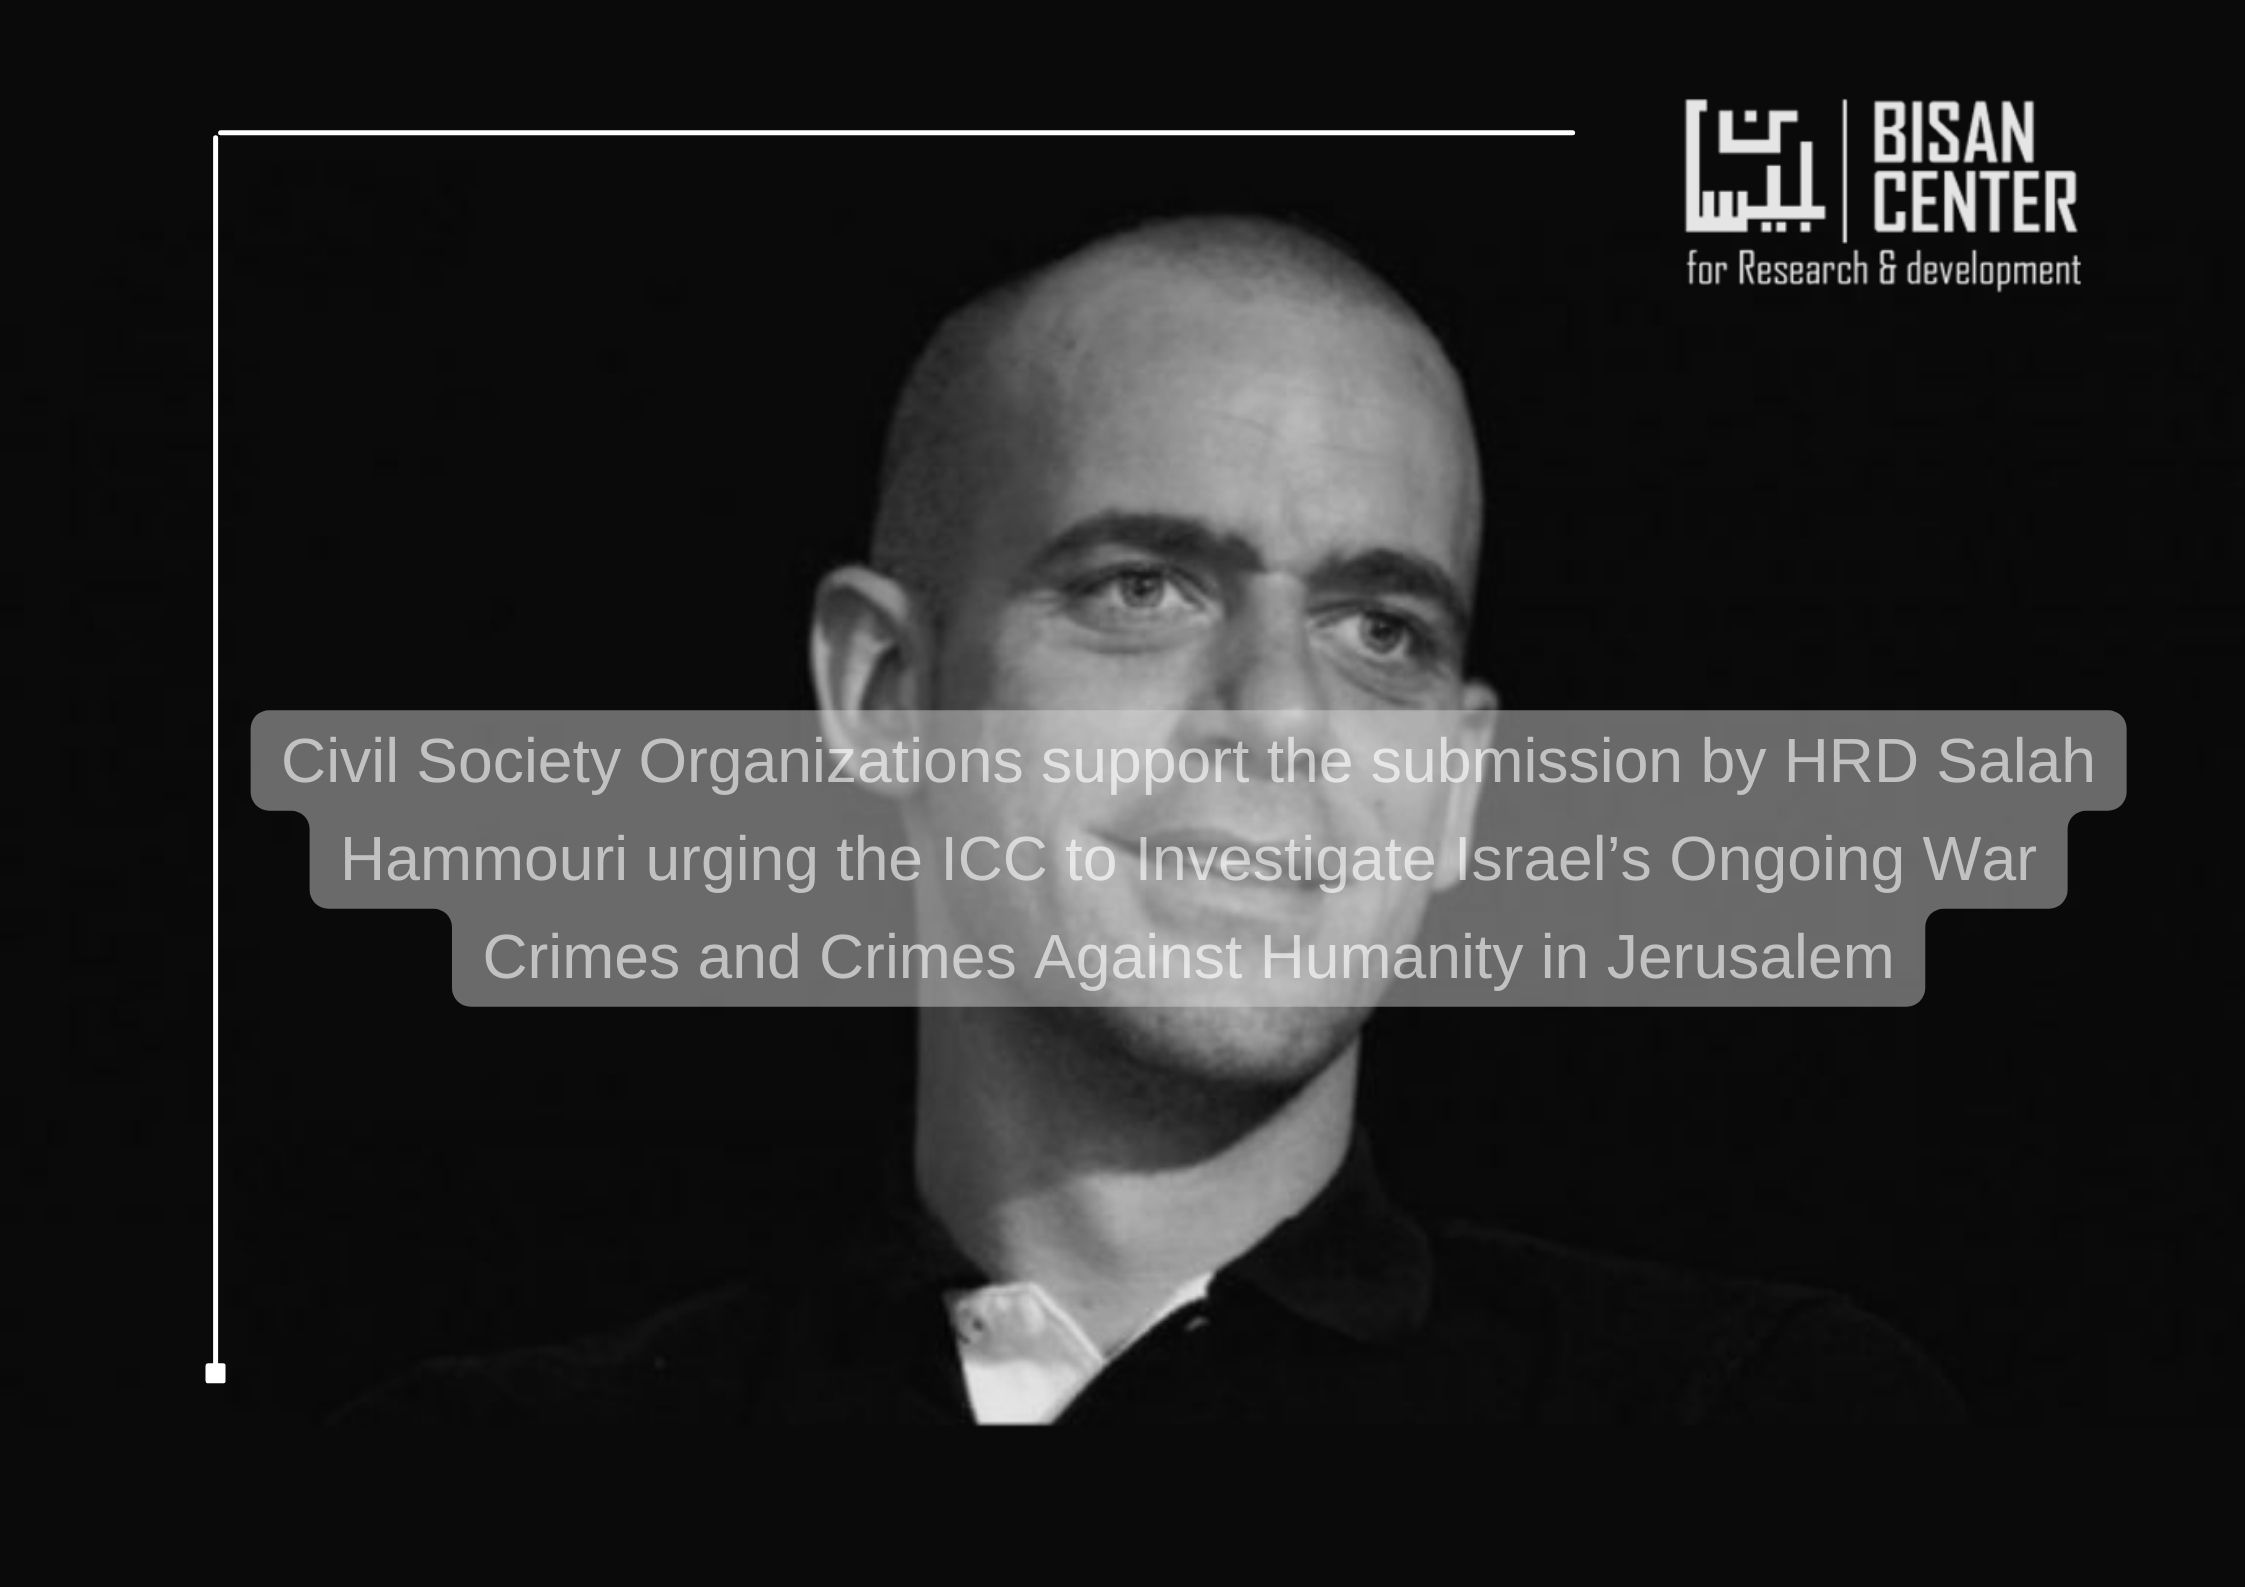 Press Release| Civil Society Organizations support the submission by HRD Salah Hammouri urging the ICC to Investigate Israel’s Ongoing War Crimes and Crimes Against Humanity in Jerusalem